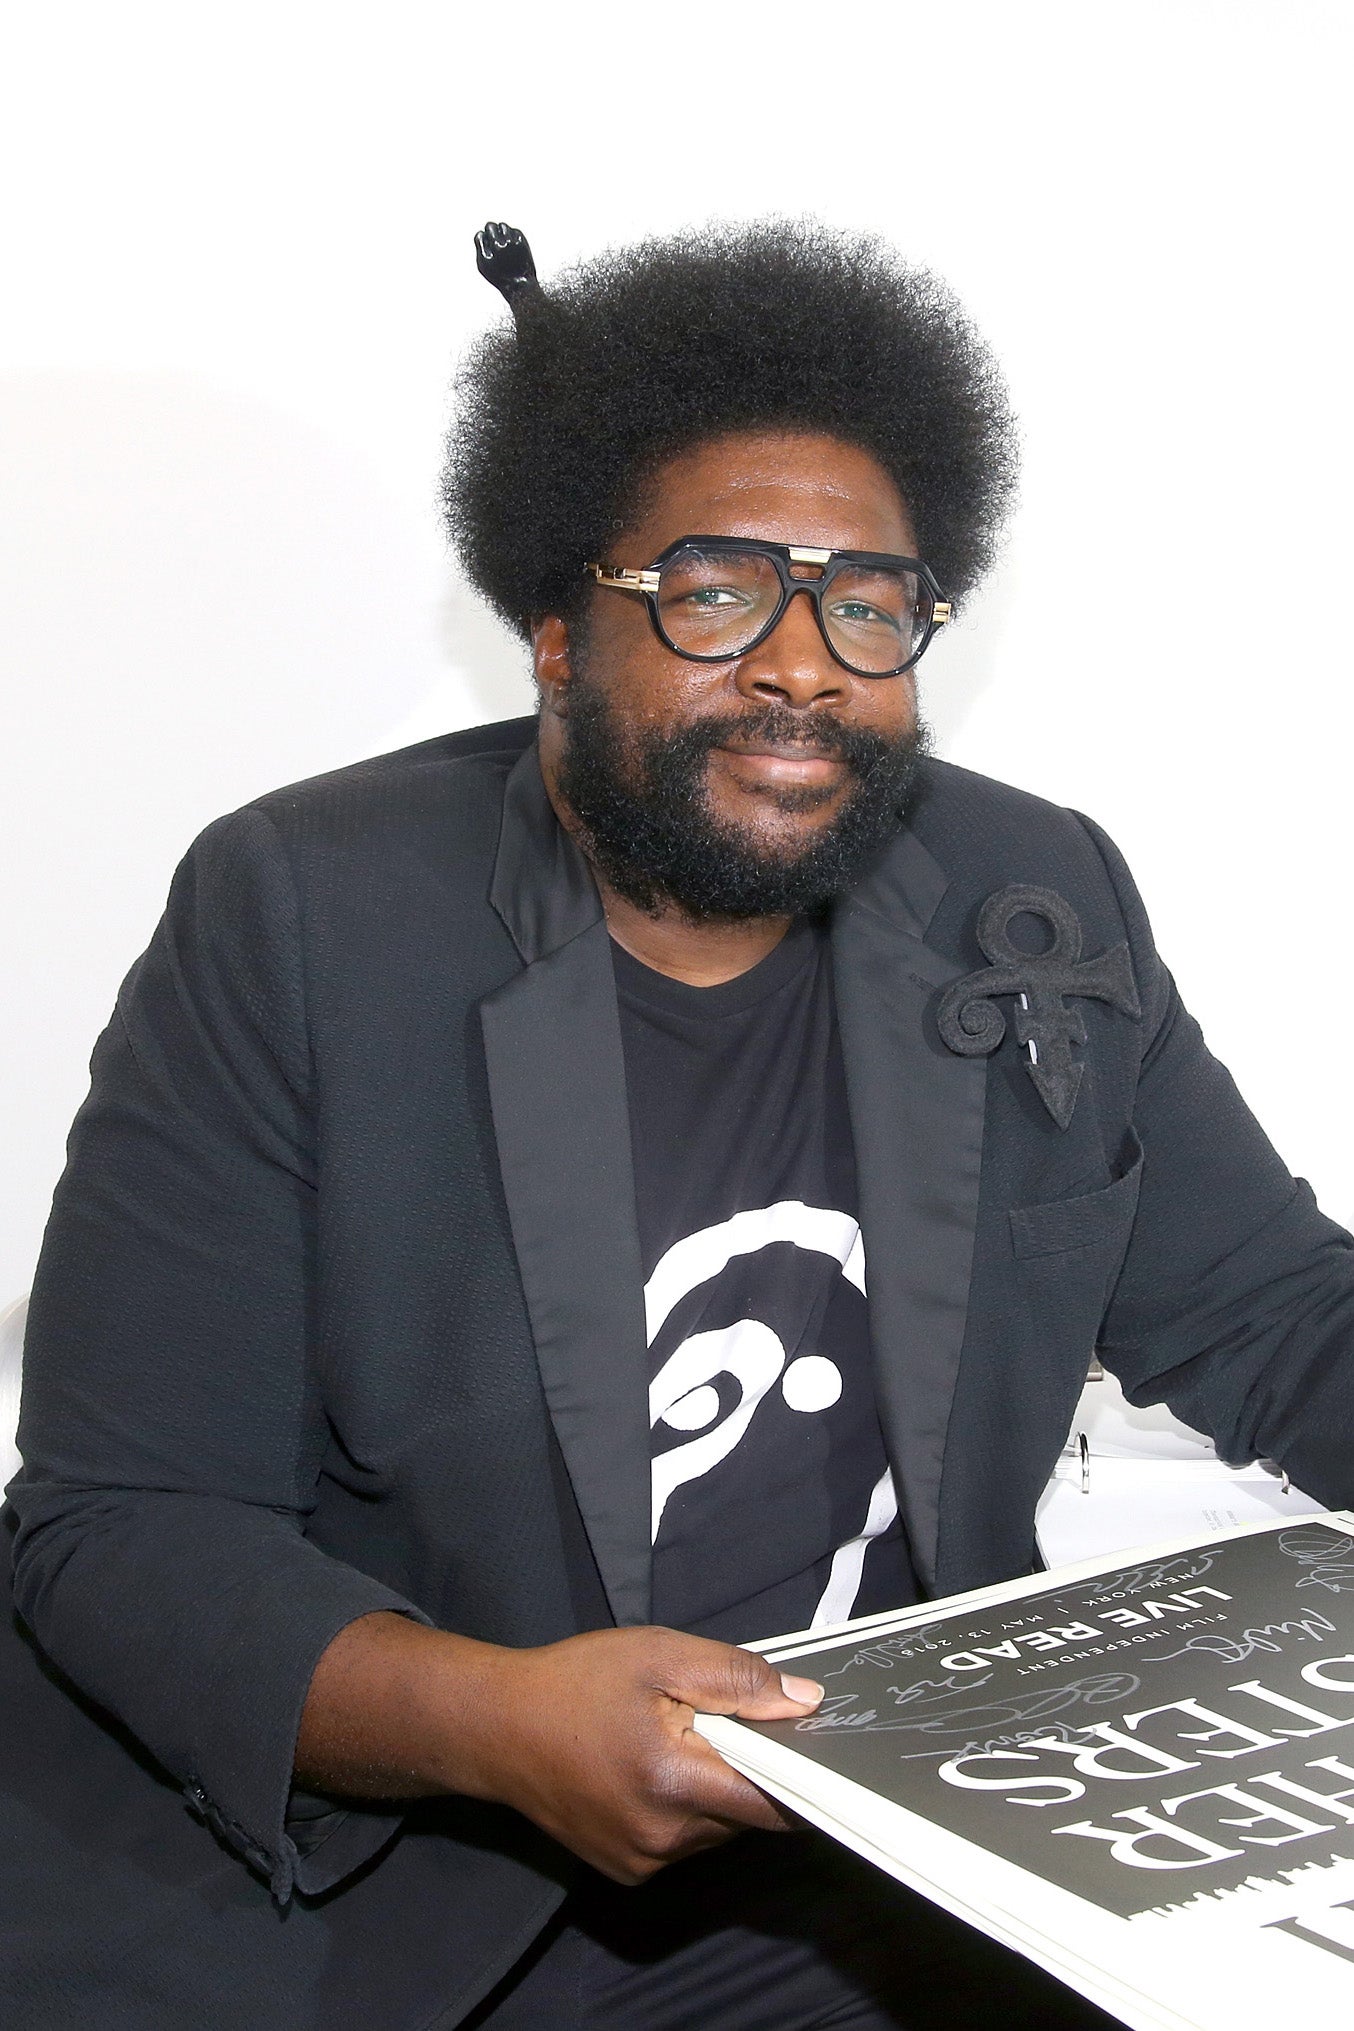 Questlove Will Pay Chrisette Michele If She Refuses To Perform At Trump Inauguration
